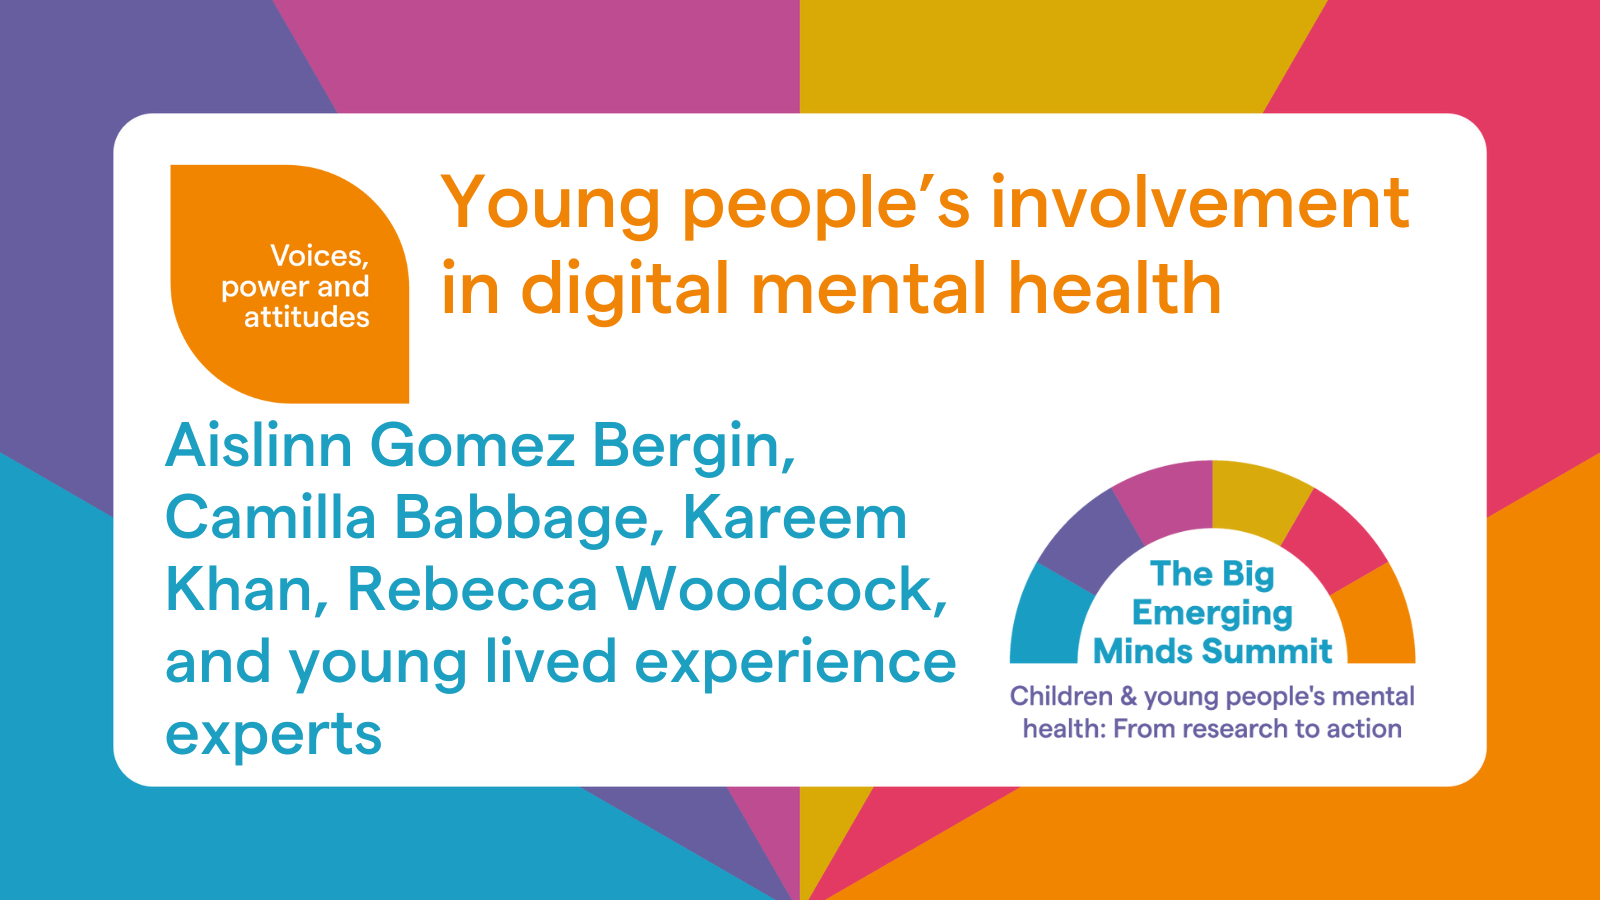 Young people's involvement in digital mental health